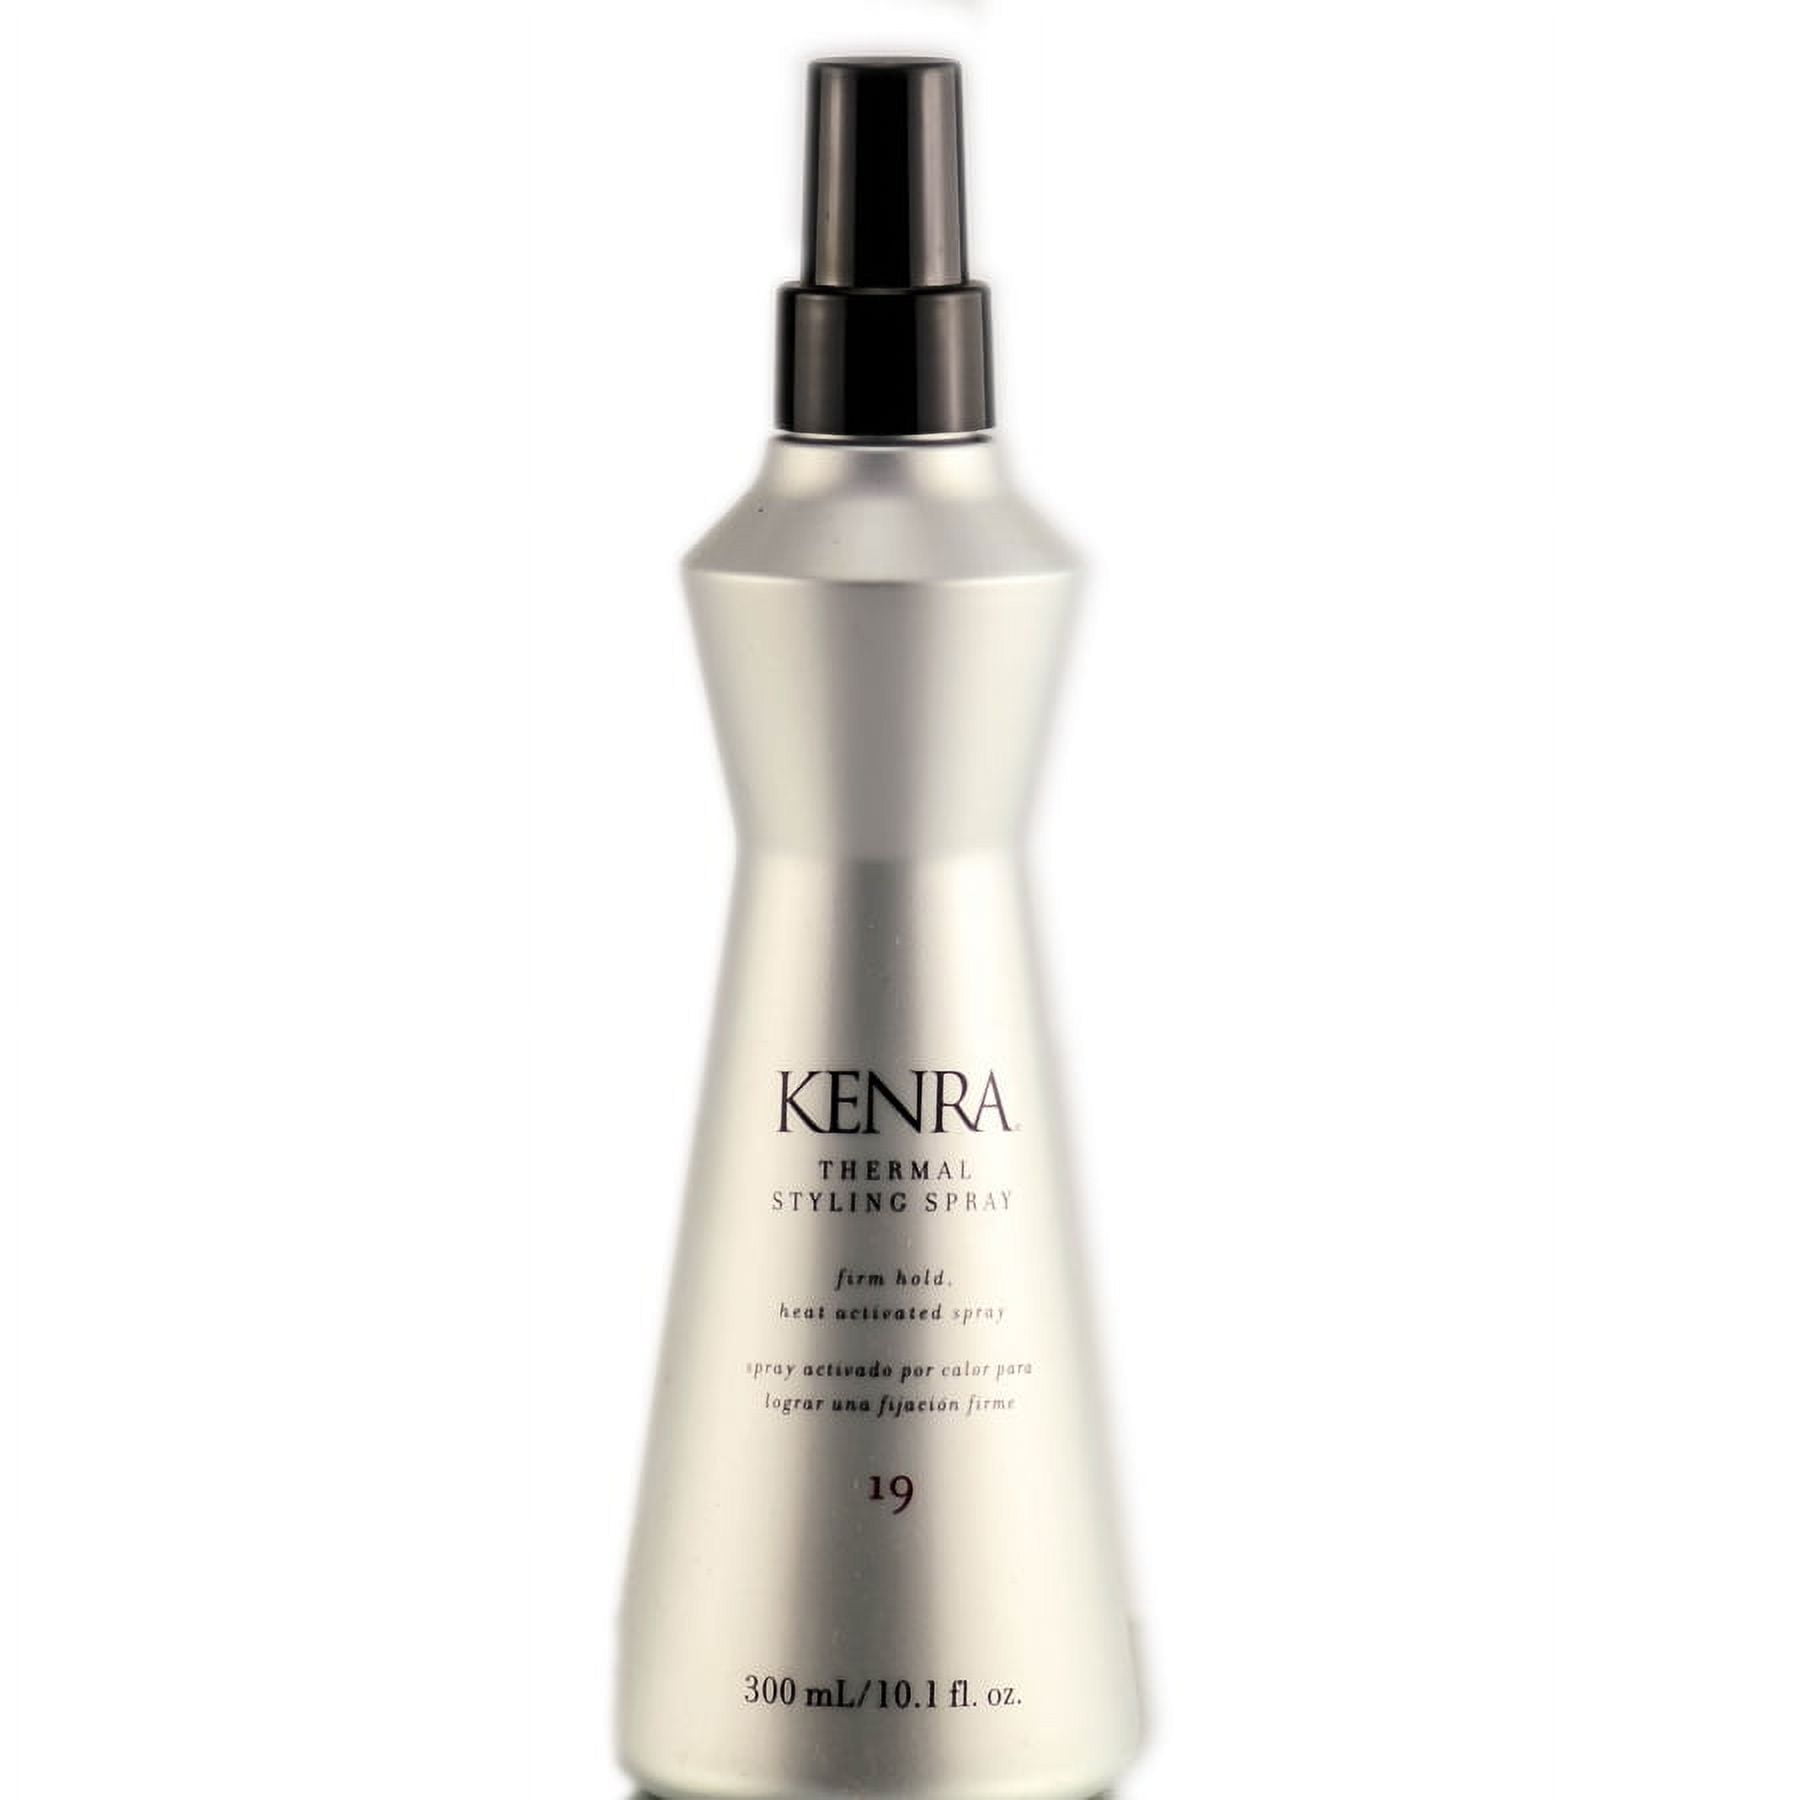 Kenra Thermal Styling Spray #19 10.1 oz - image 1 of 8